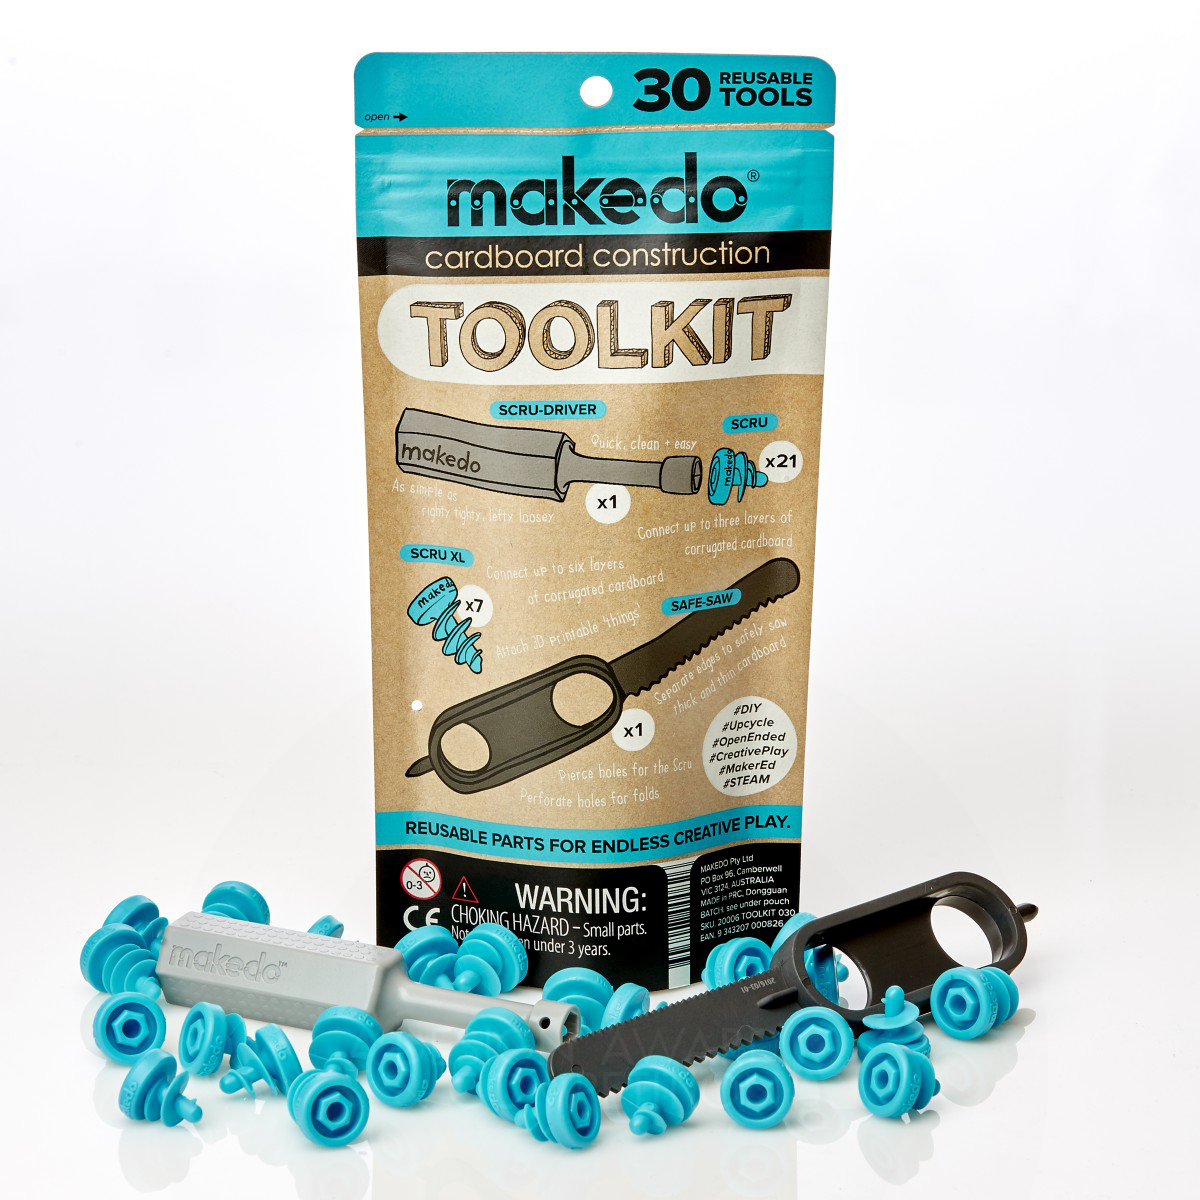 Makedo Toolkit cardboard construction system by Paul Justin